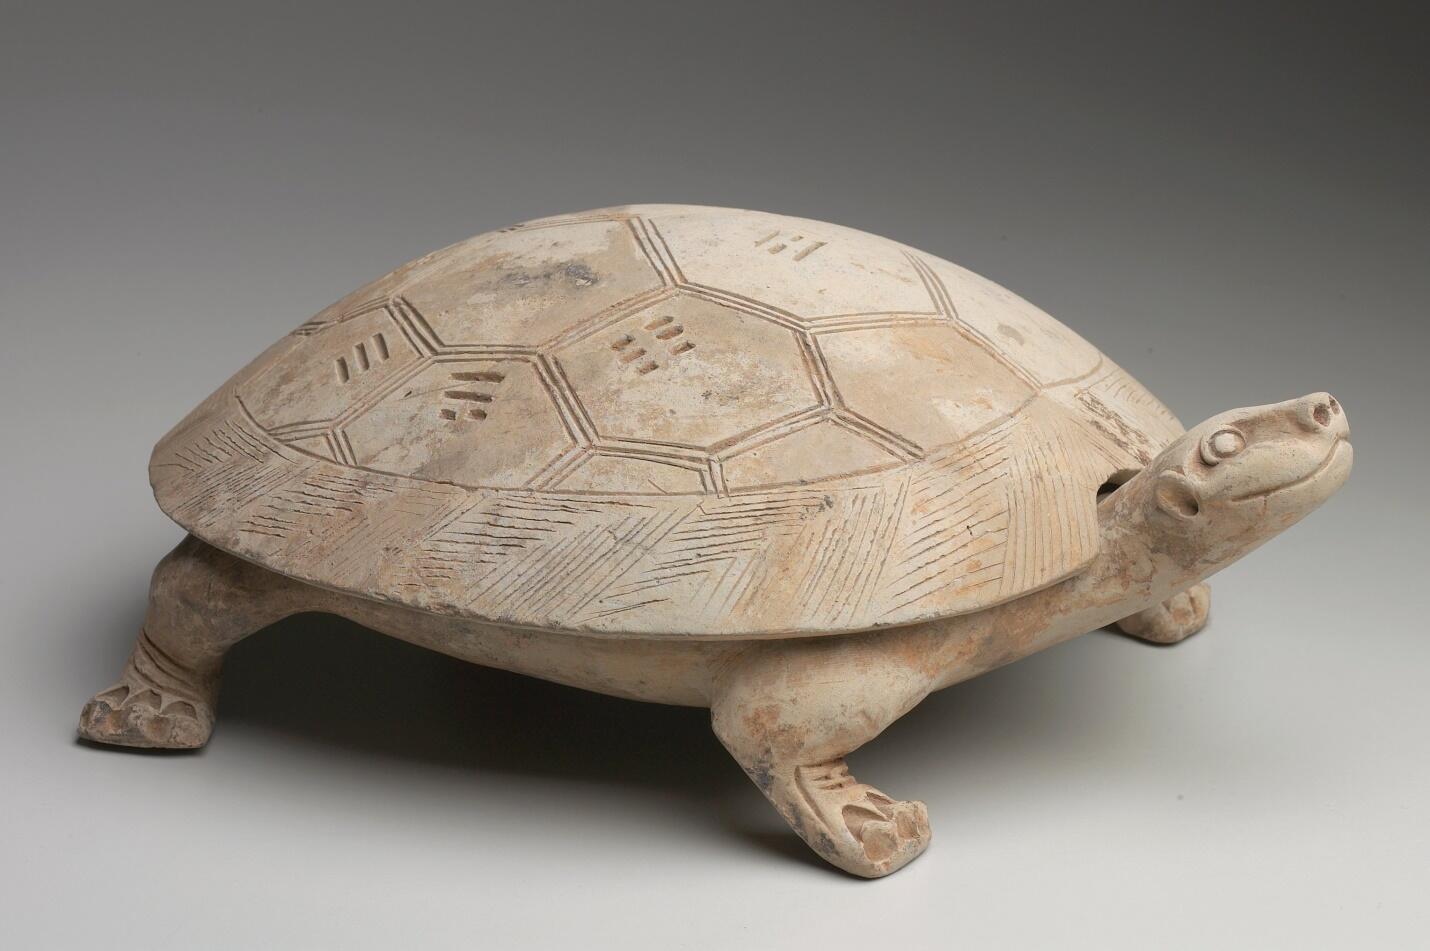 Ink tablet in the form of a turtle